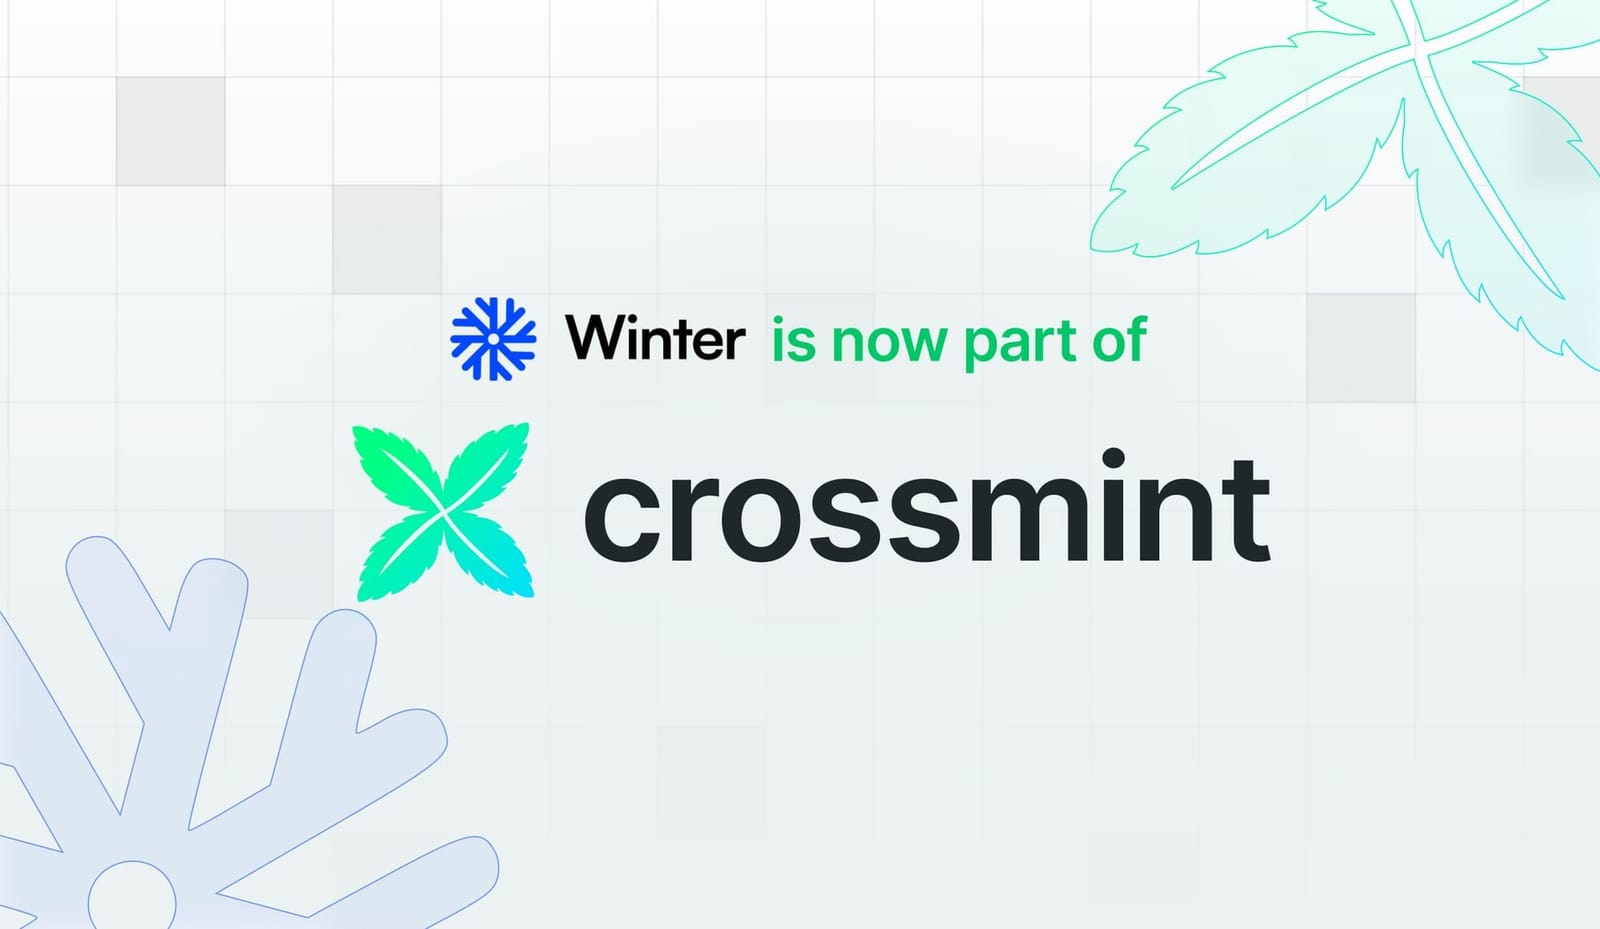 Crossmint acquires Winter and launches new cross-chain payments product